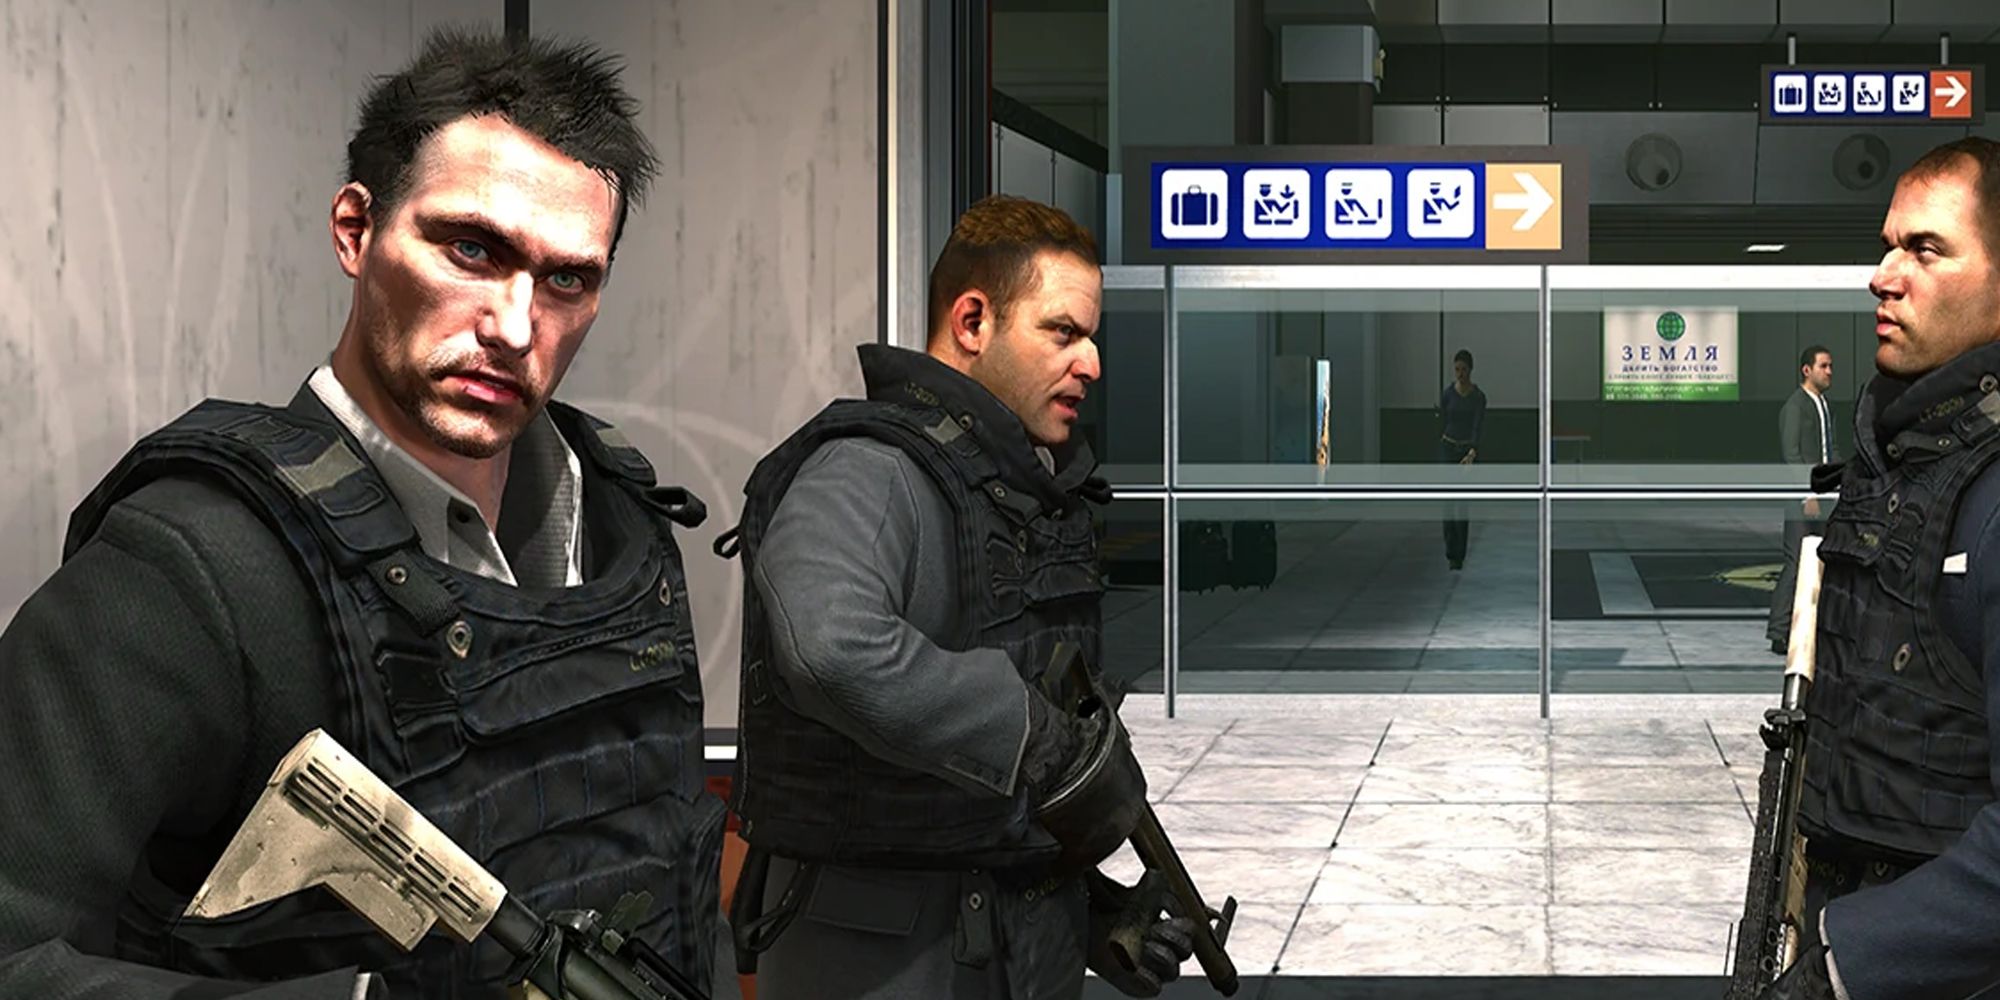 Vladimir Makarov in Modern Warfare 2 standing in an elevator at the start of the No Russians mission